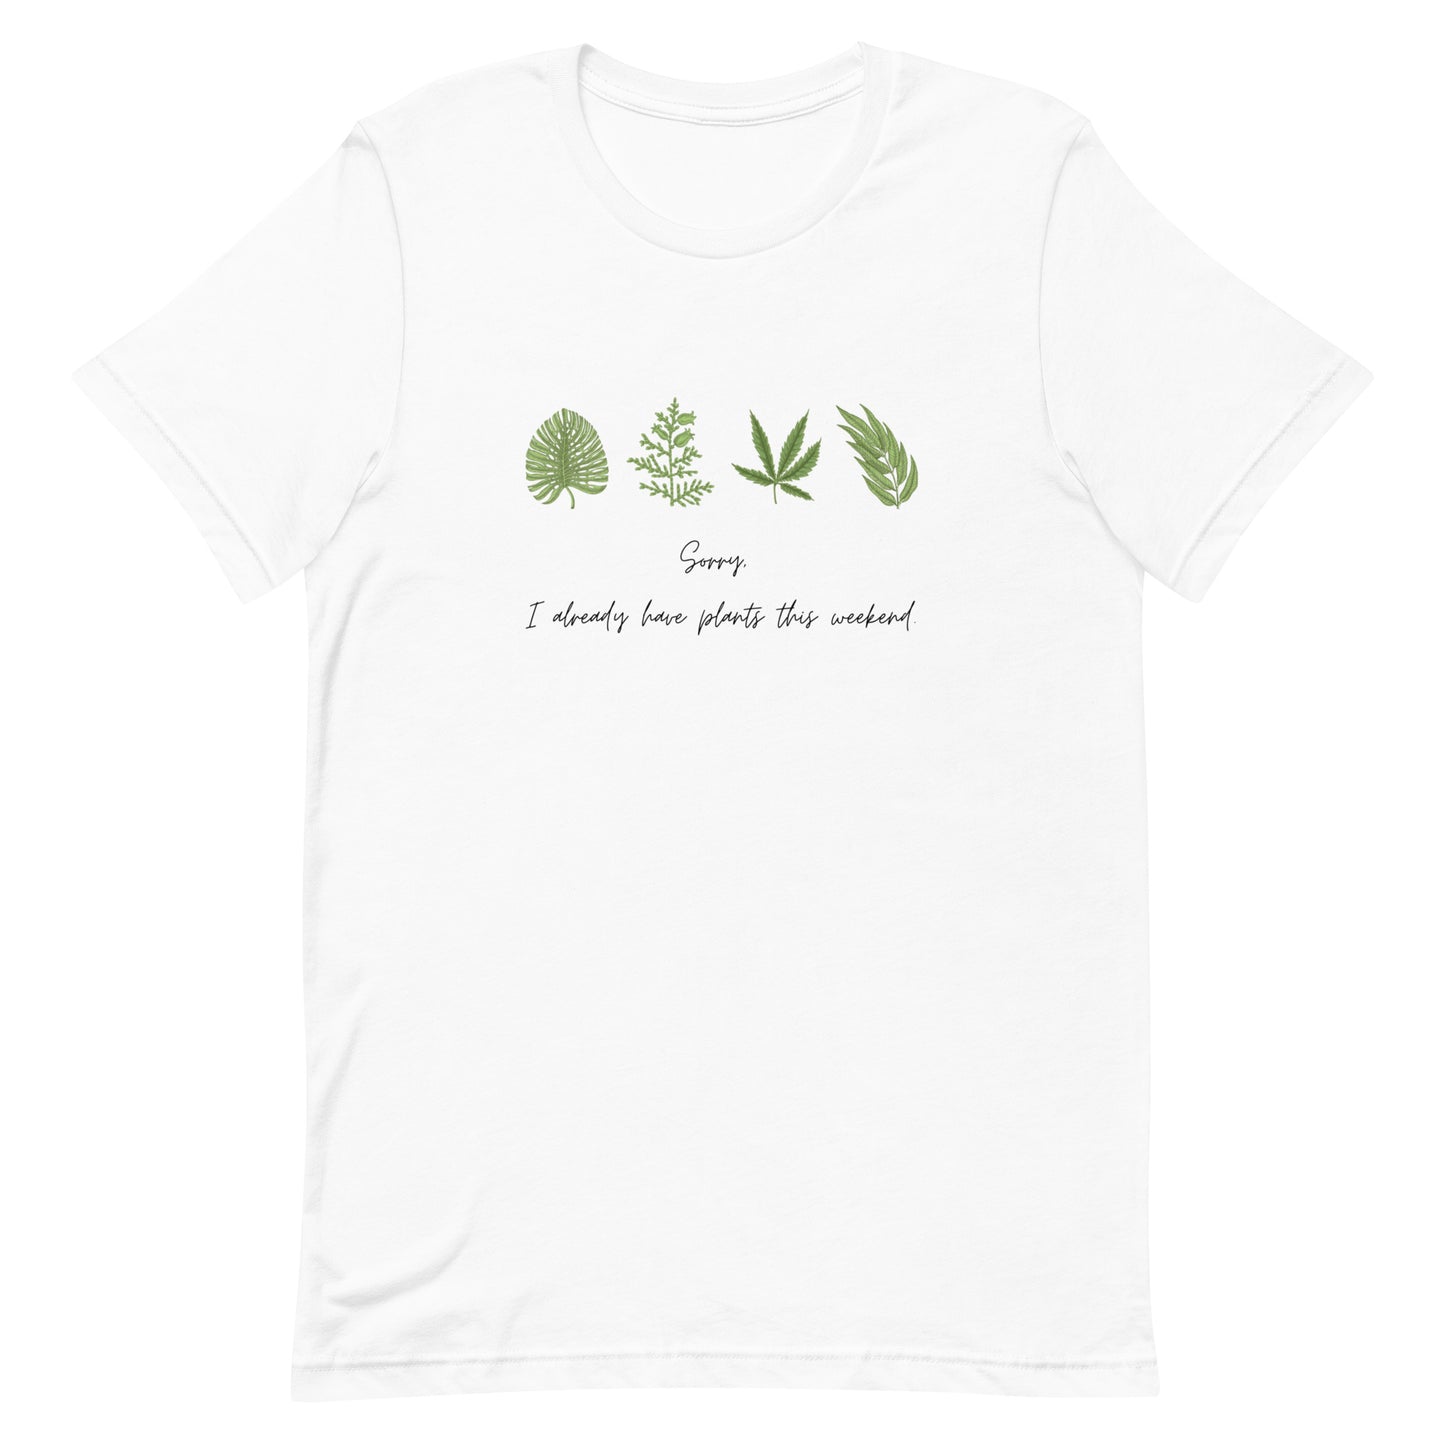 PLANTS THIS WEEKEND Unisex T-shirt